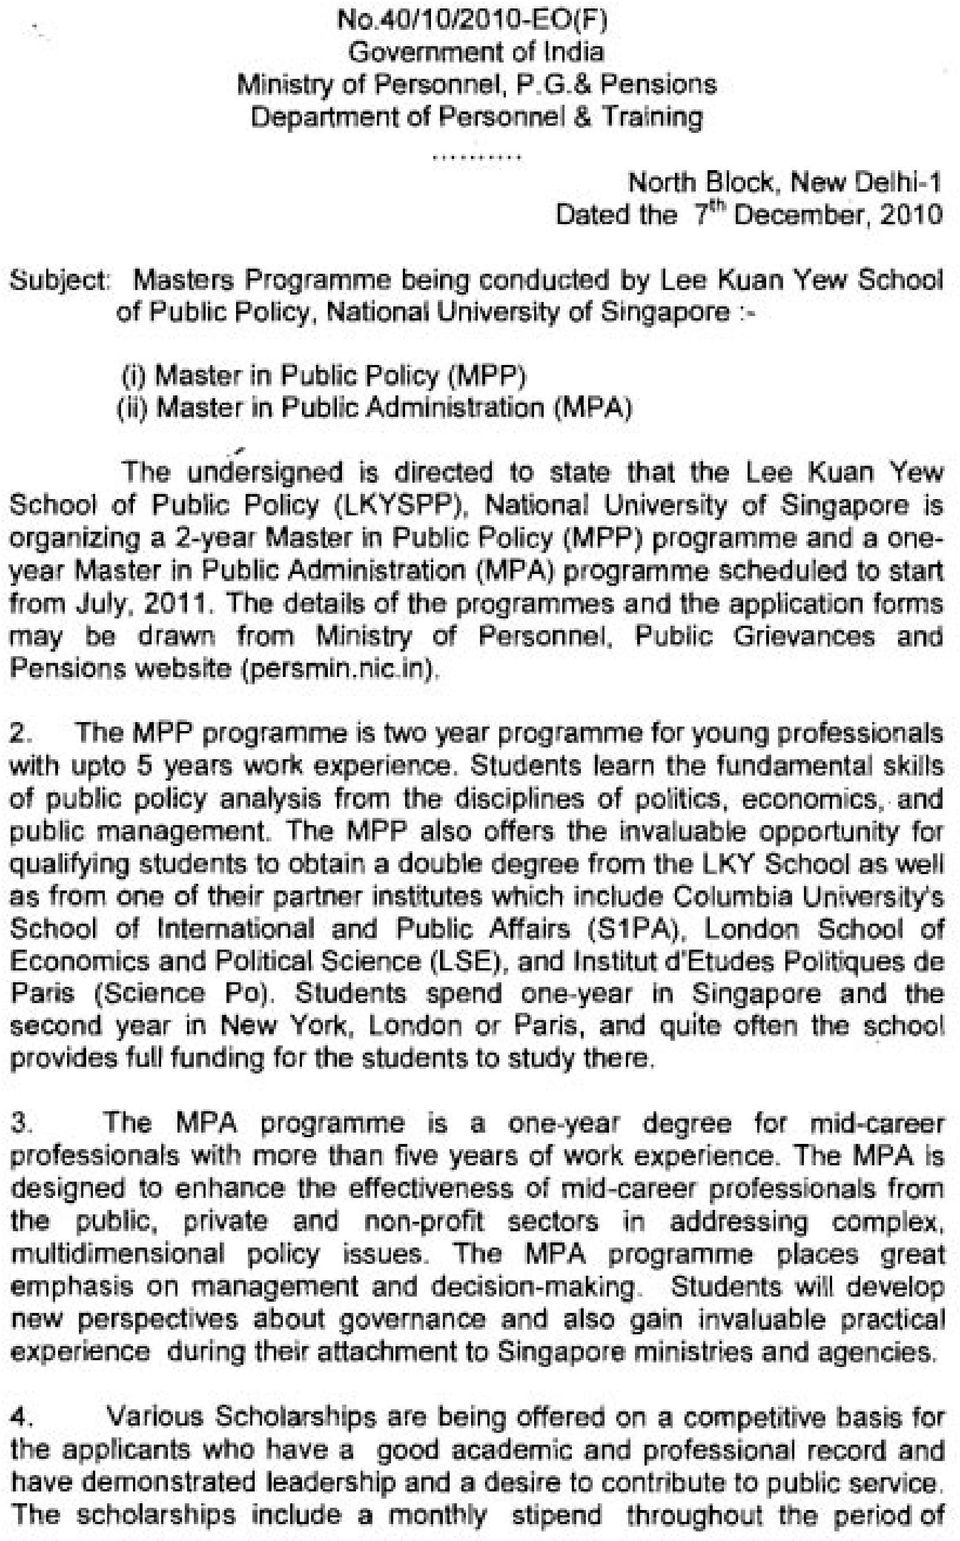 Policy (MPP) (ii) Master in Public Administration (MPA) The undgrsigned is directed to state that the Lee Kuan Yew School of Public Policy (LKYSPP), National University of Singapore is organizing a